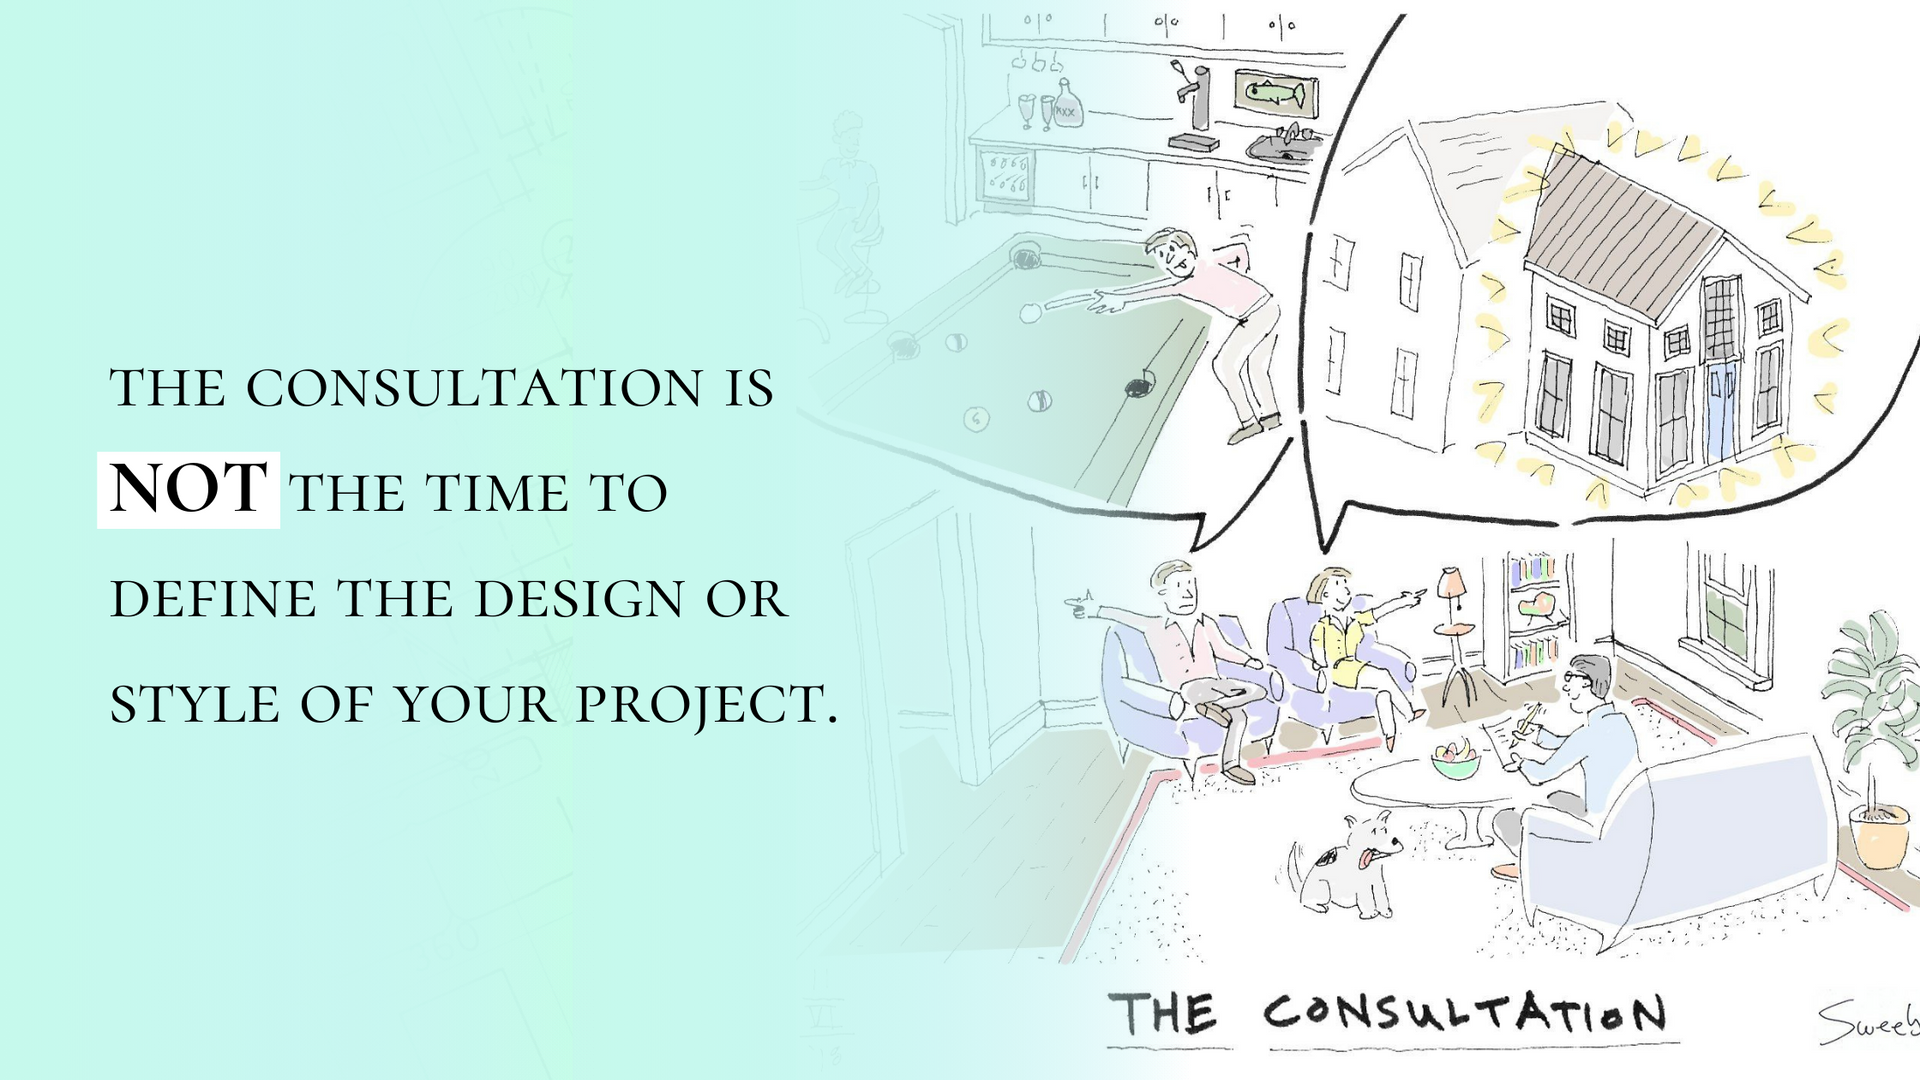 the consultation is not the time to define the design or style of your project